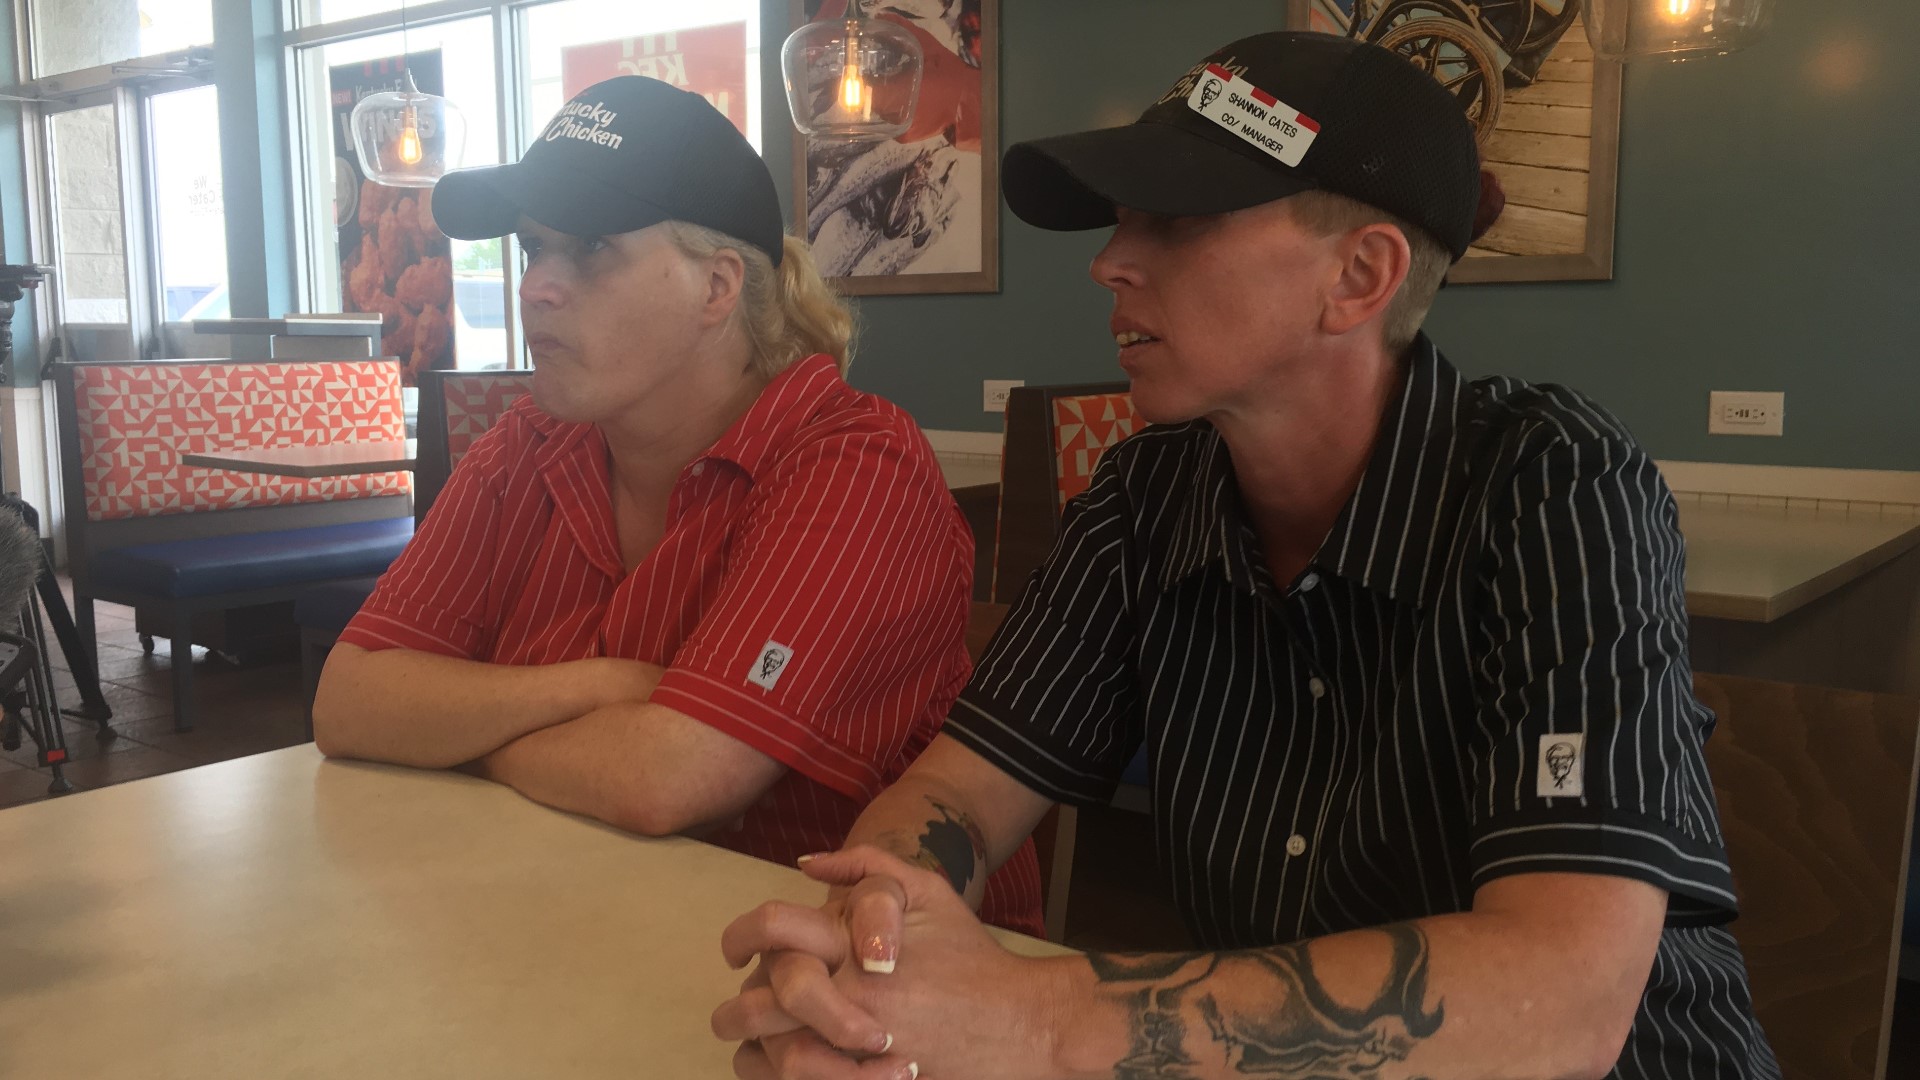 A girl ran into a KFC restaurant Tuesday and told an employee that she was being held against her will.